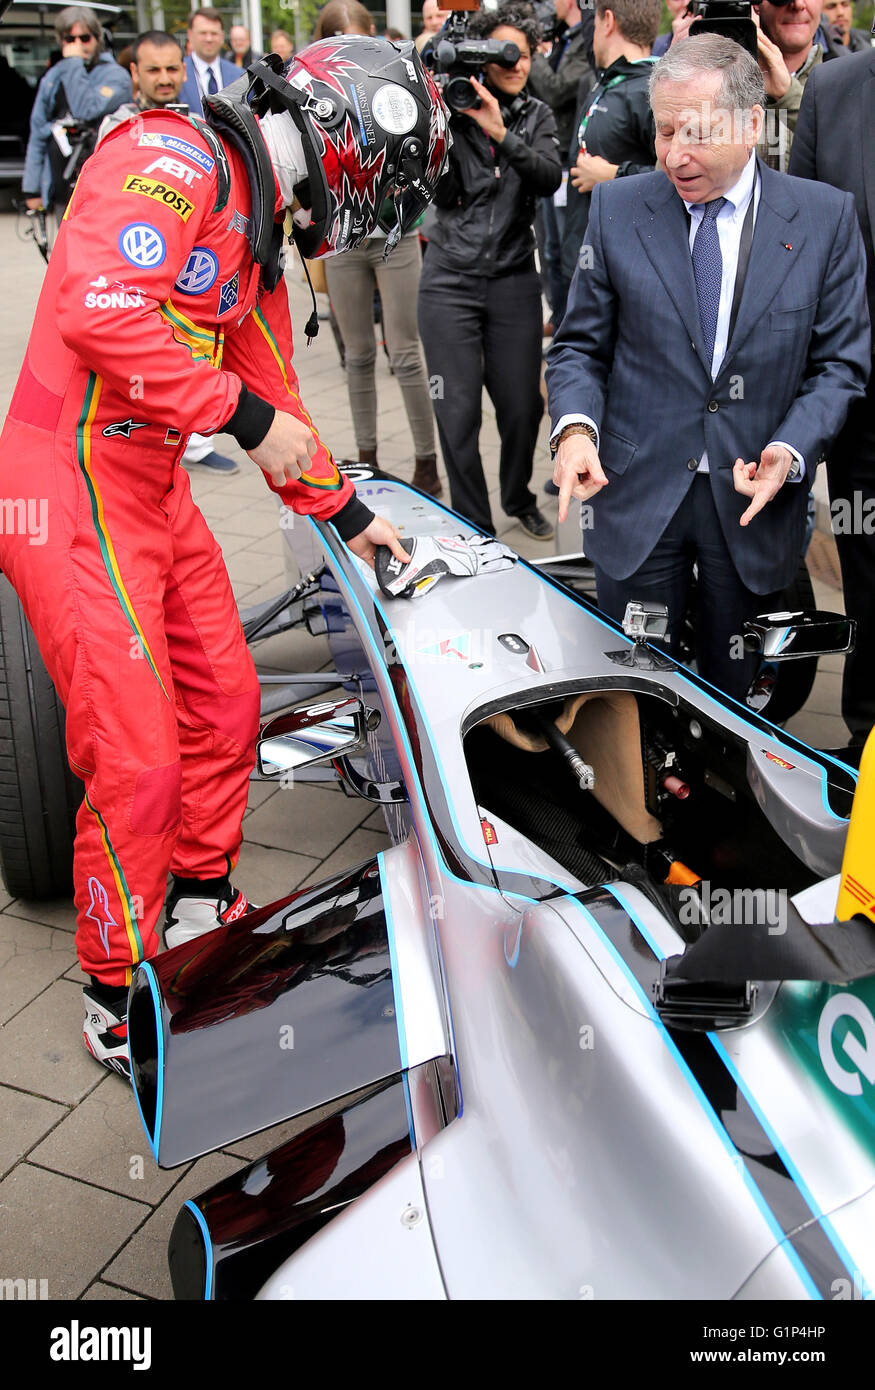 Leipzig, Germany. 18th May, 2016. Jean Todt (front R), president of the International Automobile Federation (FIA), speaks to racing driver Daniel Abt (L) during the presentation of an electric Formula E racing car at the world summit of transport ministers in Leipzig, Germany, 18 May 2016. Some 1,000 participants from 60 countries are expected to attend the three-day summit held by the International Transport Forum of the Organisation for Economic Co-operation and Development (OECD). Photo: JAN WOITAS/dpa/Alamy Live News Stock Photo